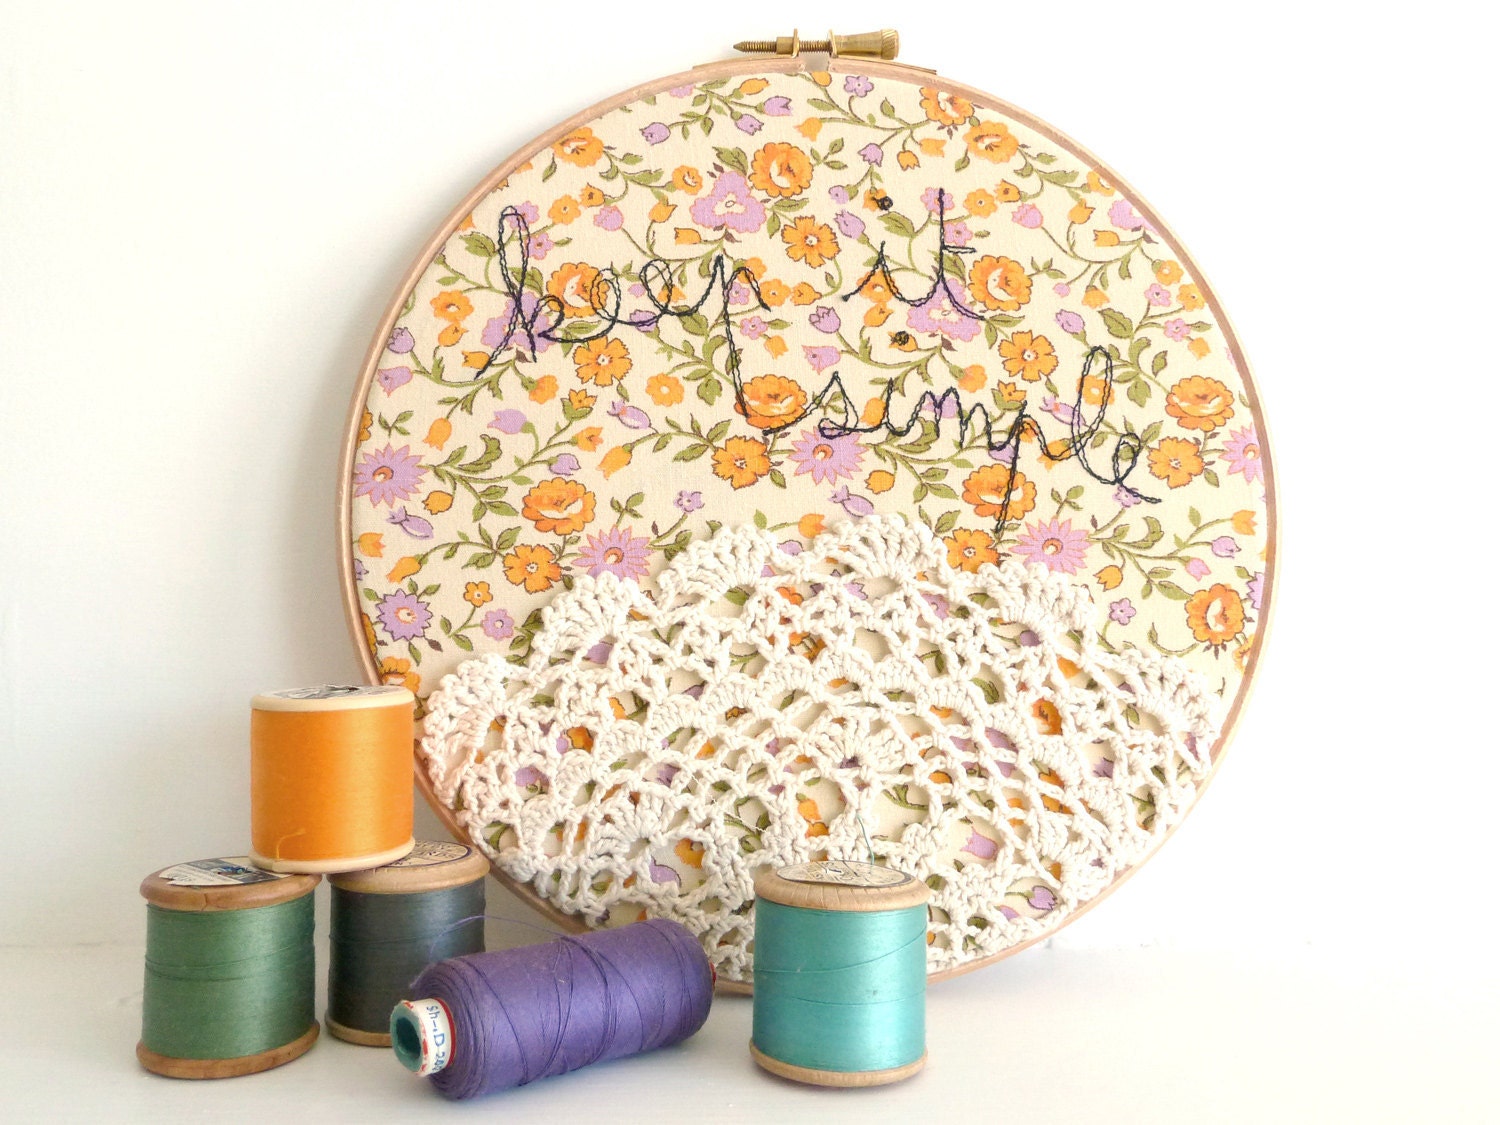 Doily Wall Art Embroidery Hoop - 'Keep it simple' in yellow and purple - 8" hoop